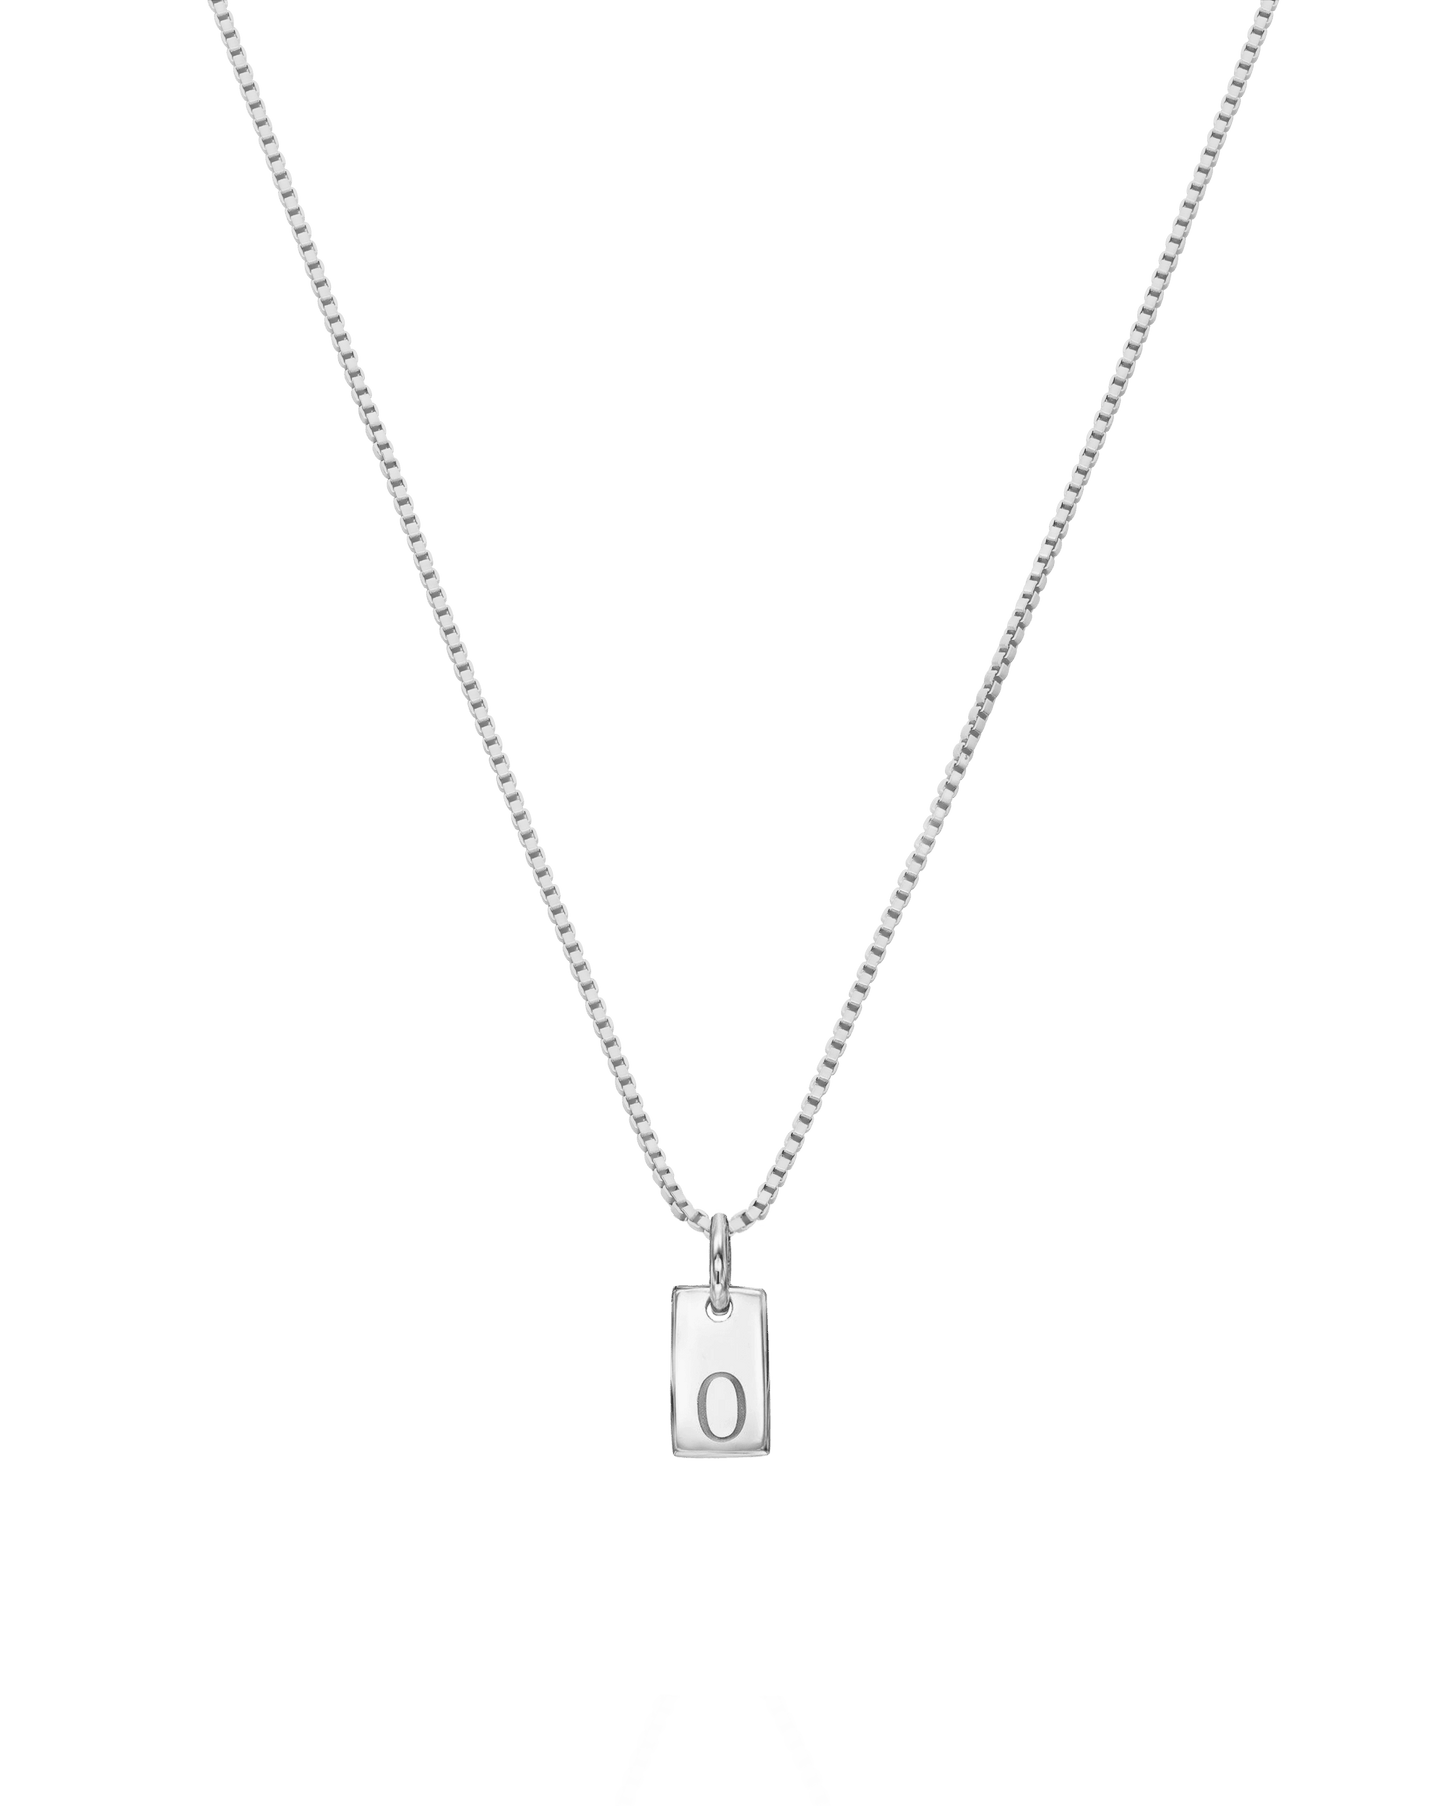 Single Initial Mini Dogtag Necklace - 925 Sterling Silver Necklaces magal-dev 1 Tag 16'' 